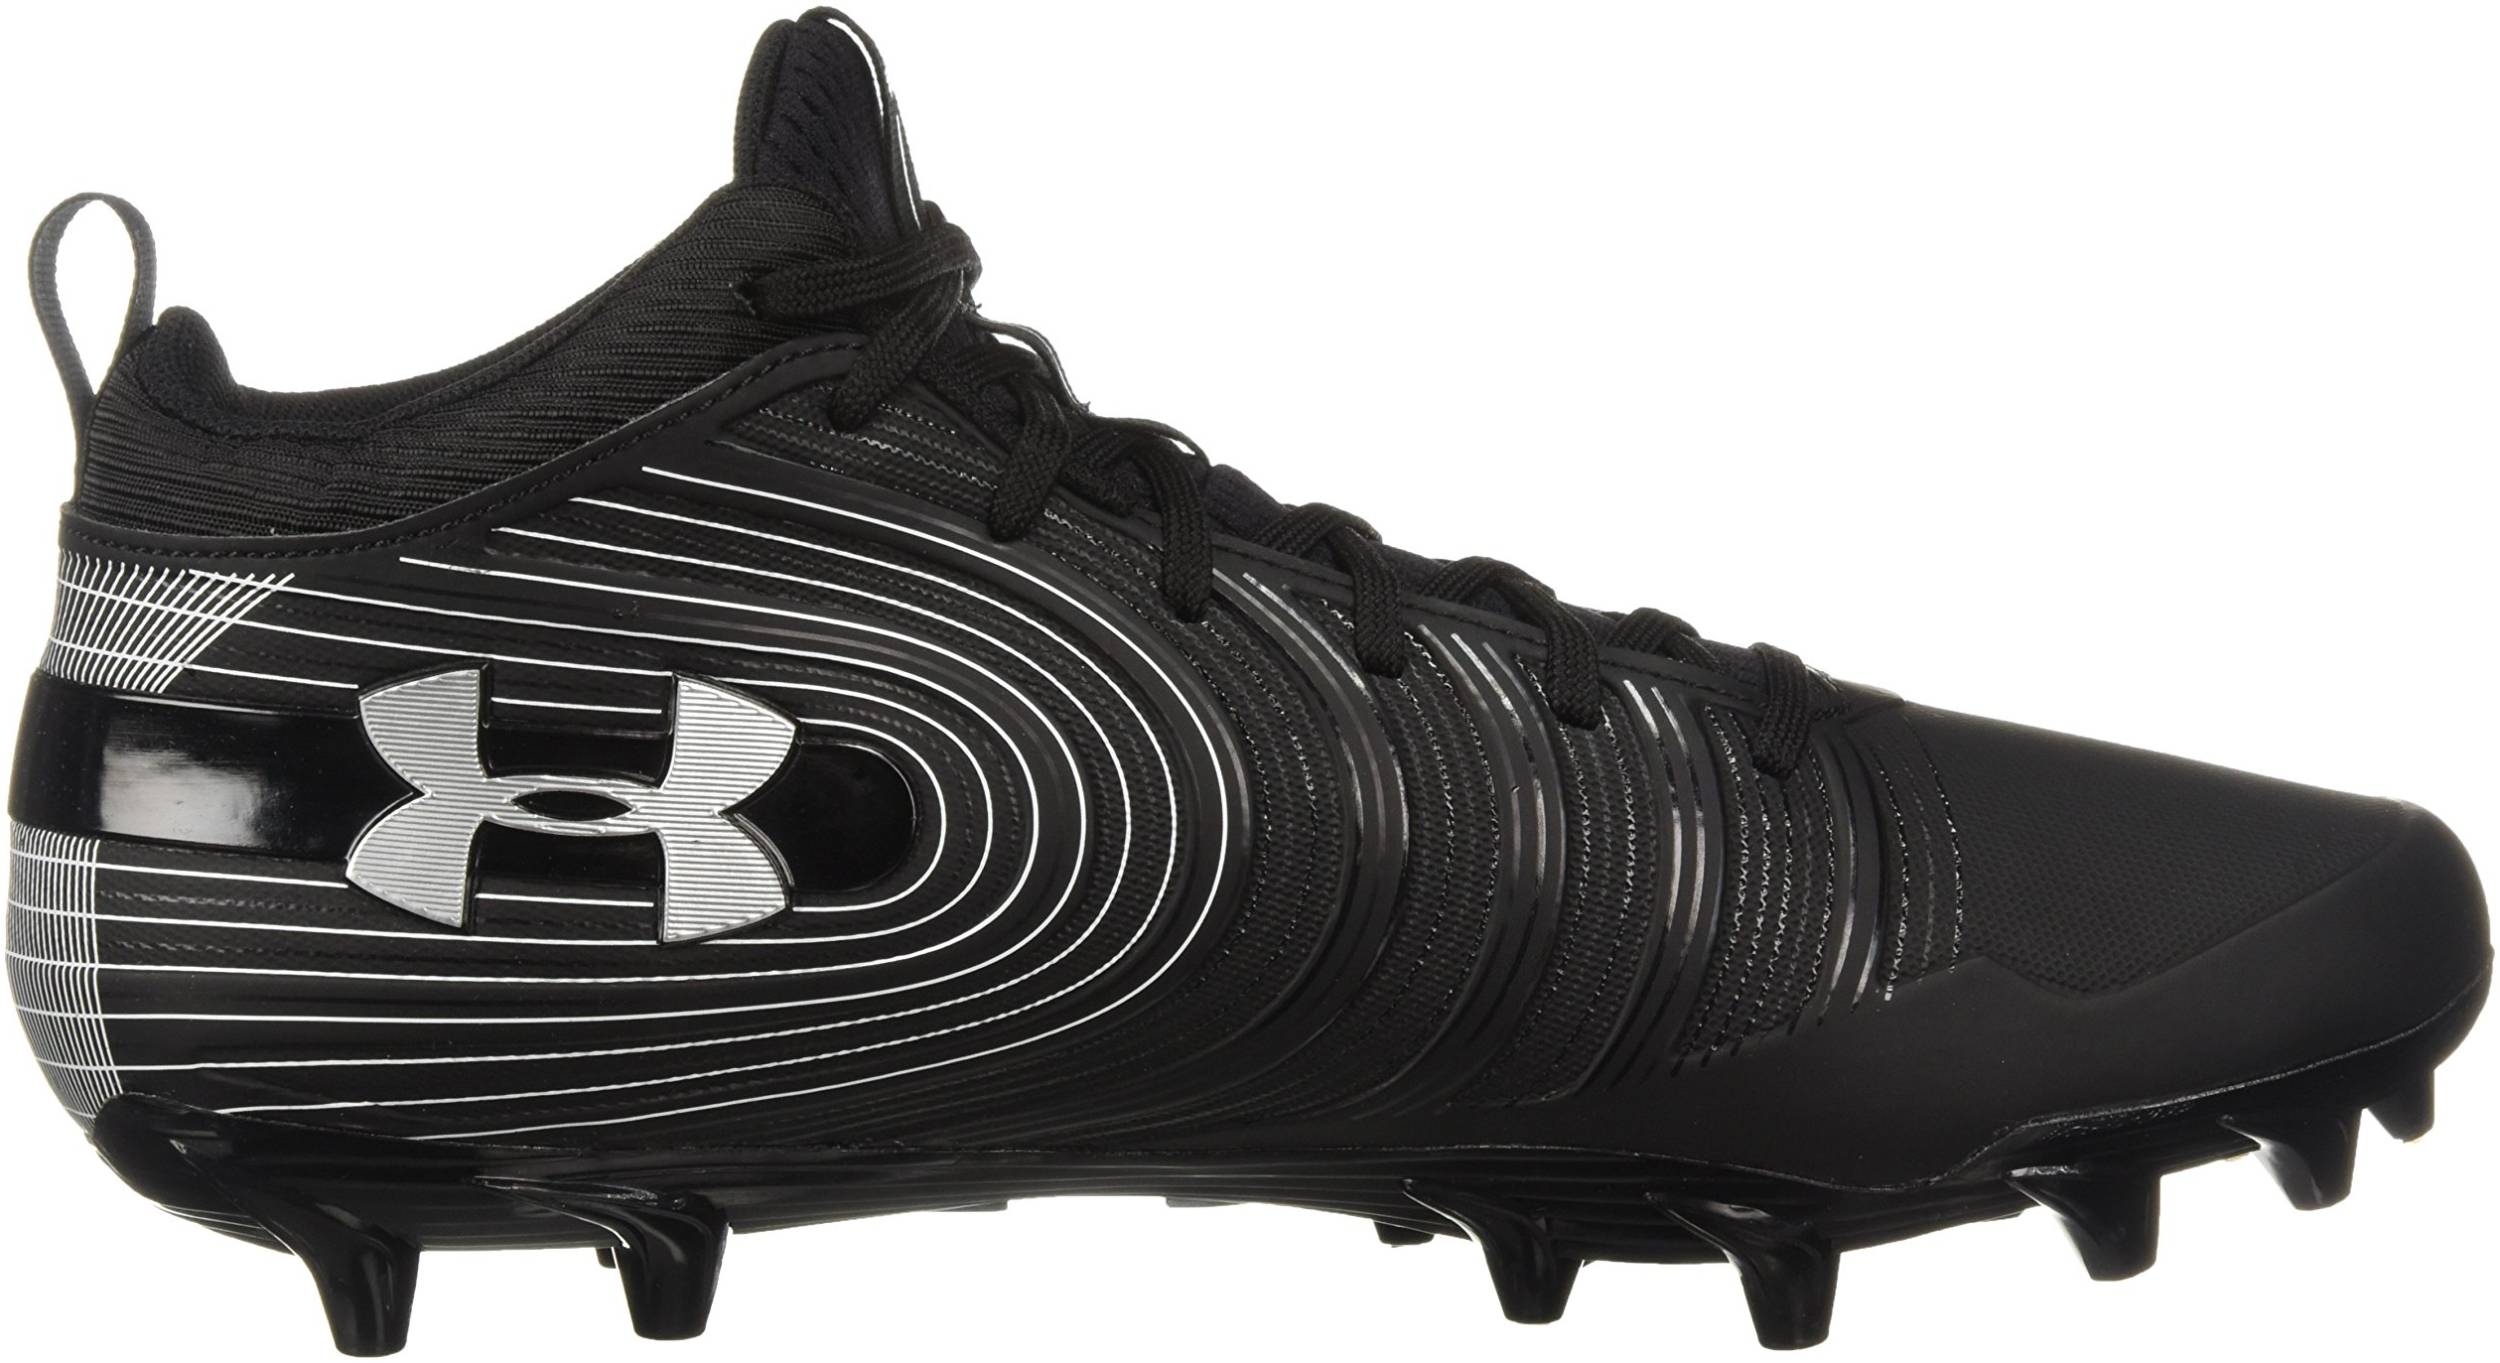 Under Armour UA NITRO Mid MC Football Cleats Size 16 Black Silver 3000181 001 for sale online